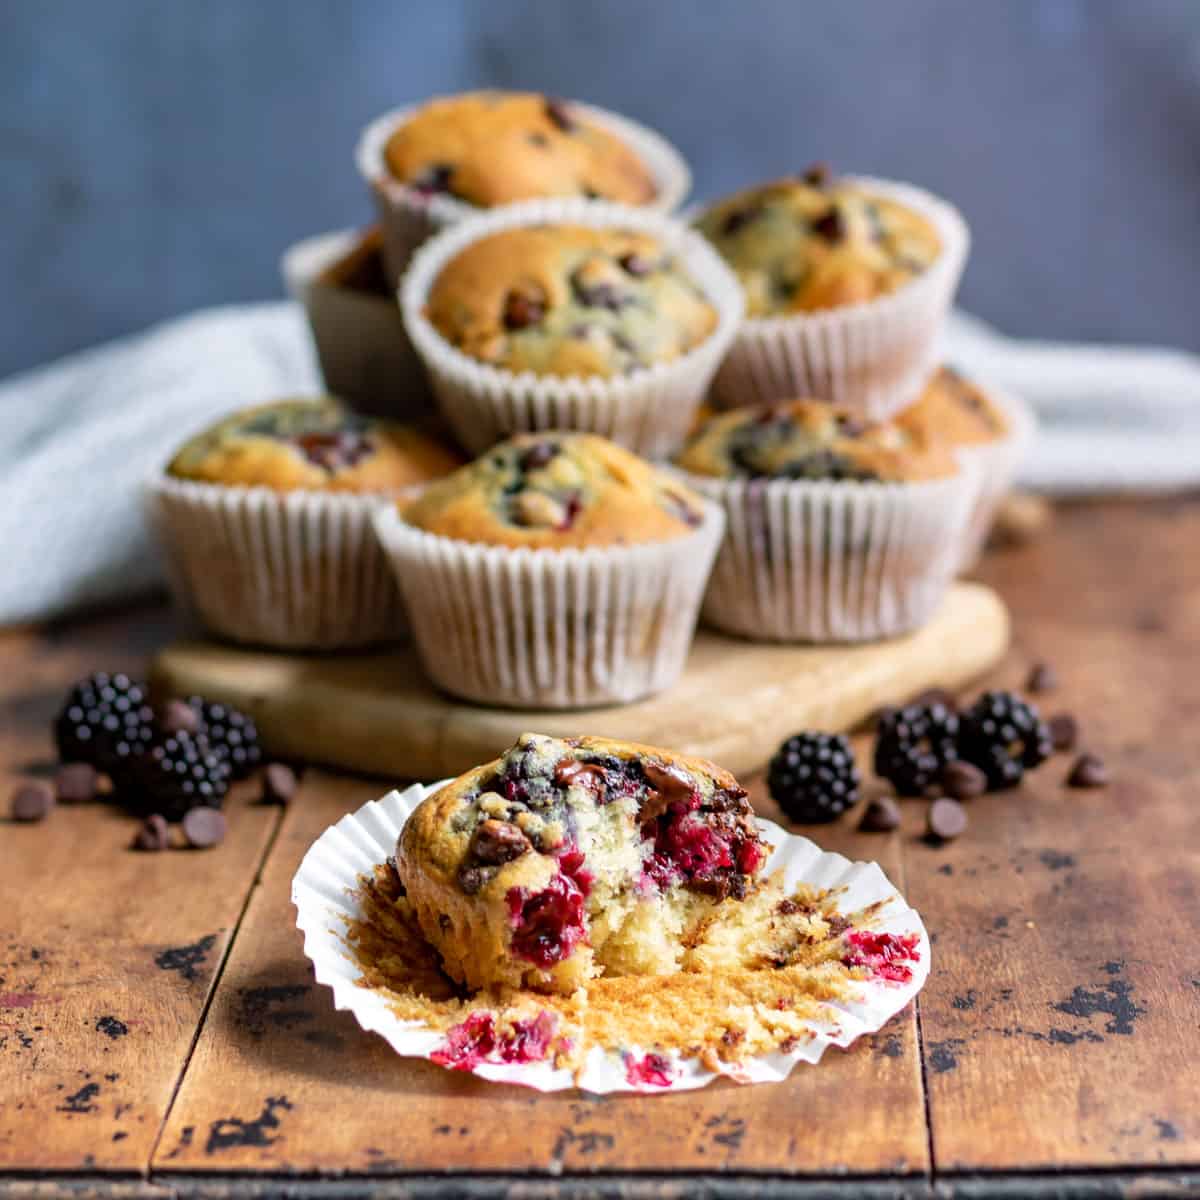 A pile of muffins with one in front with a bite out.